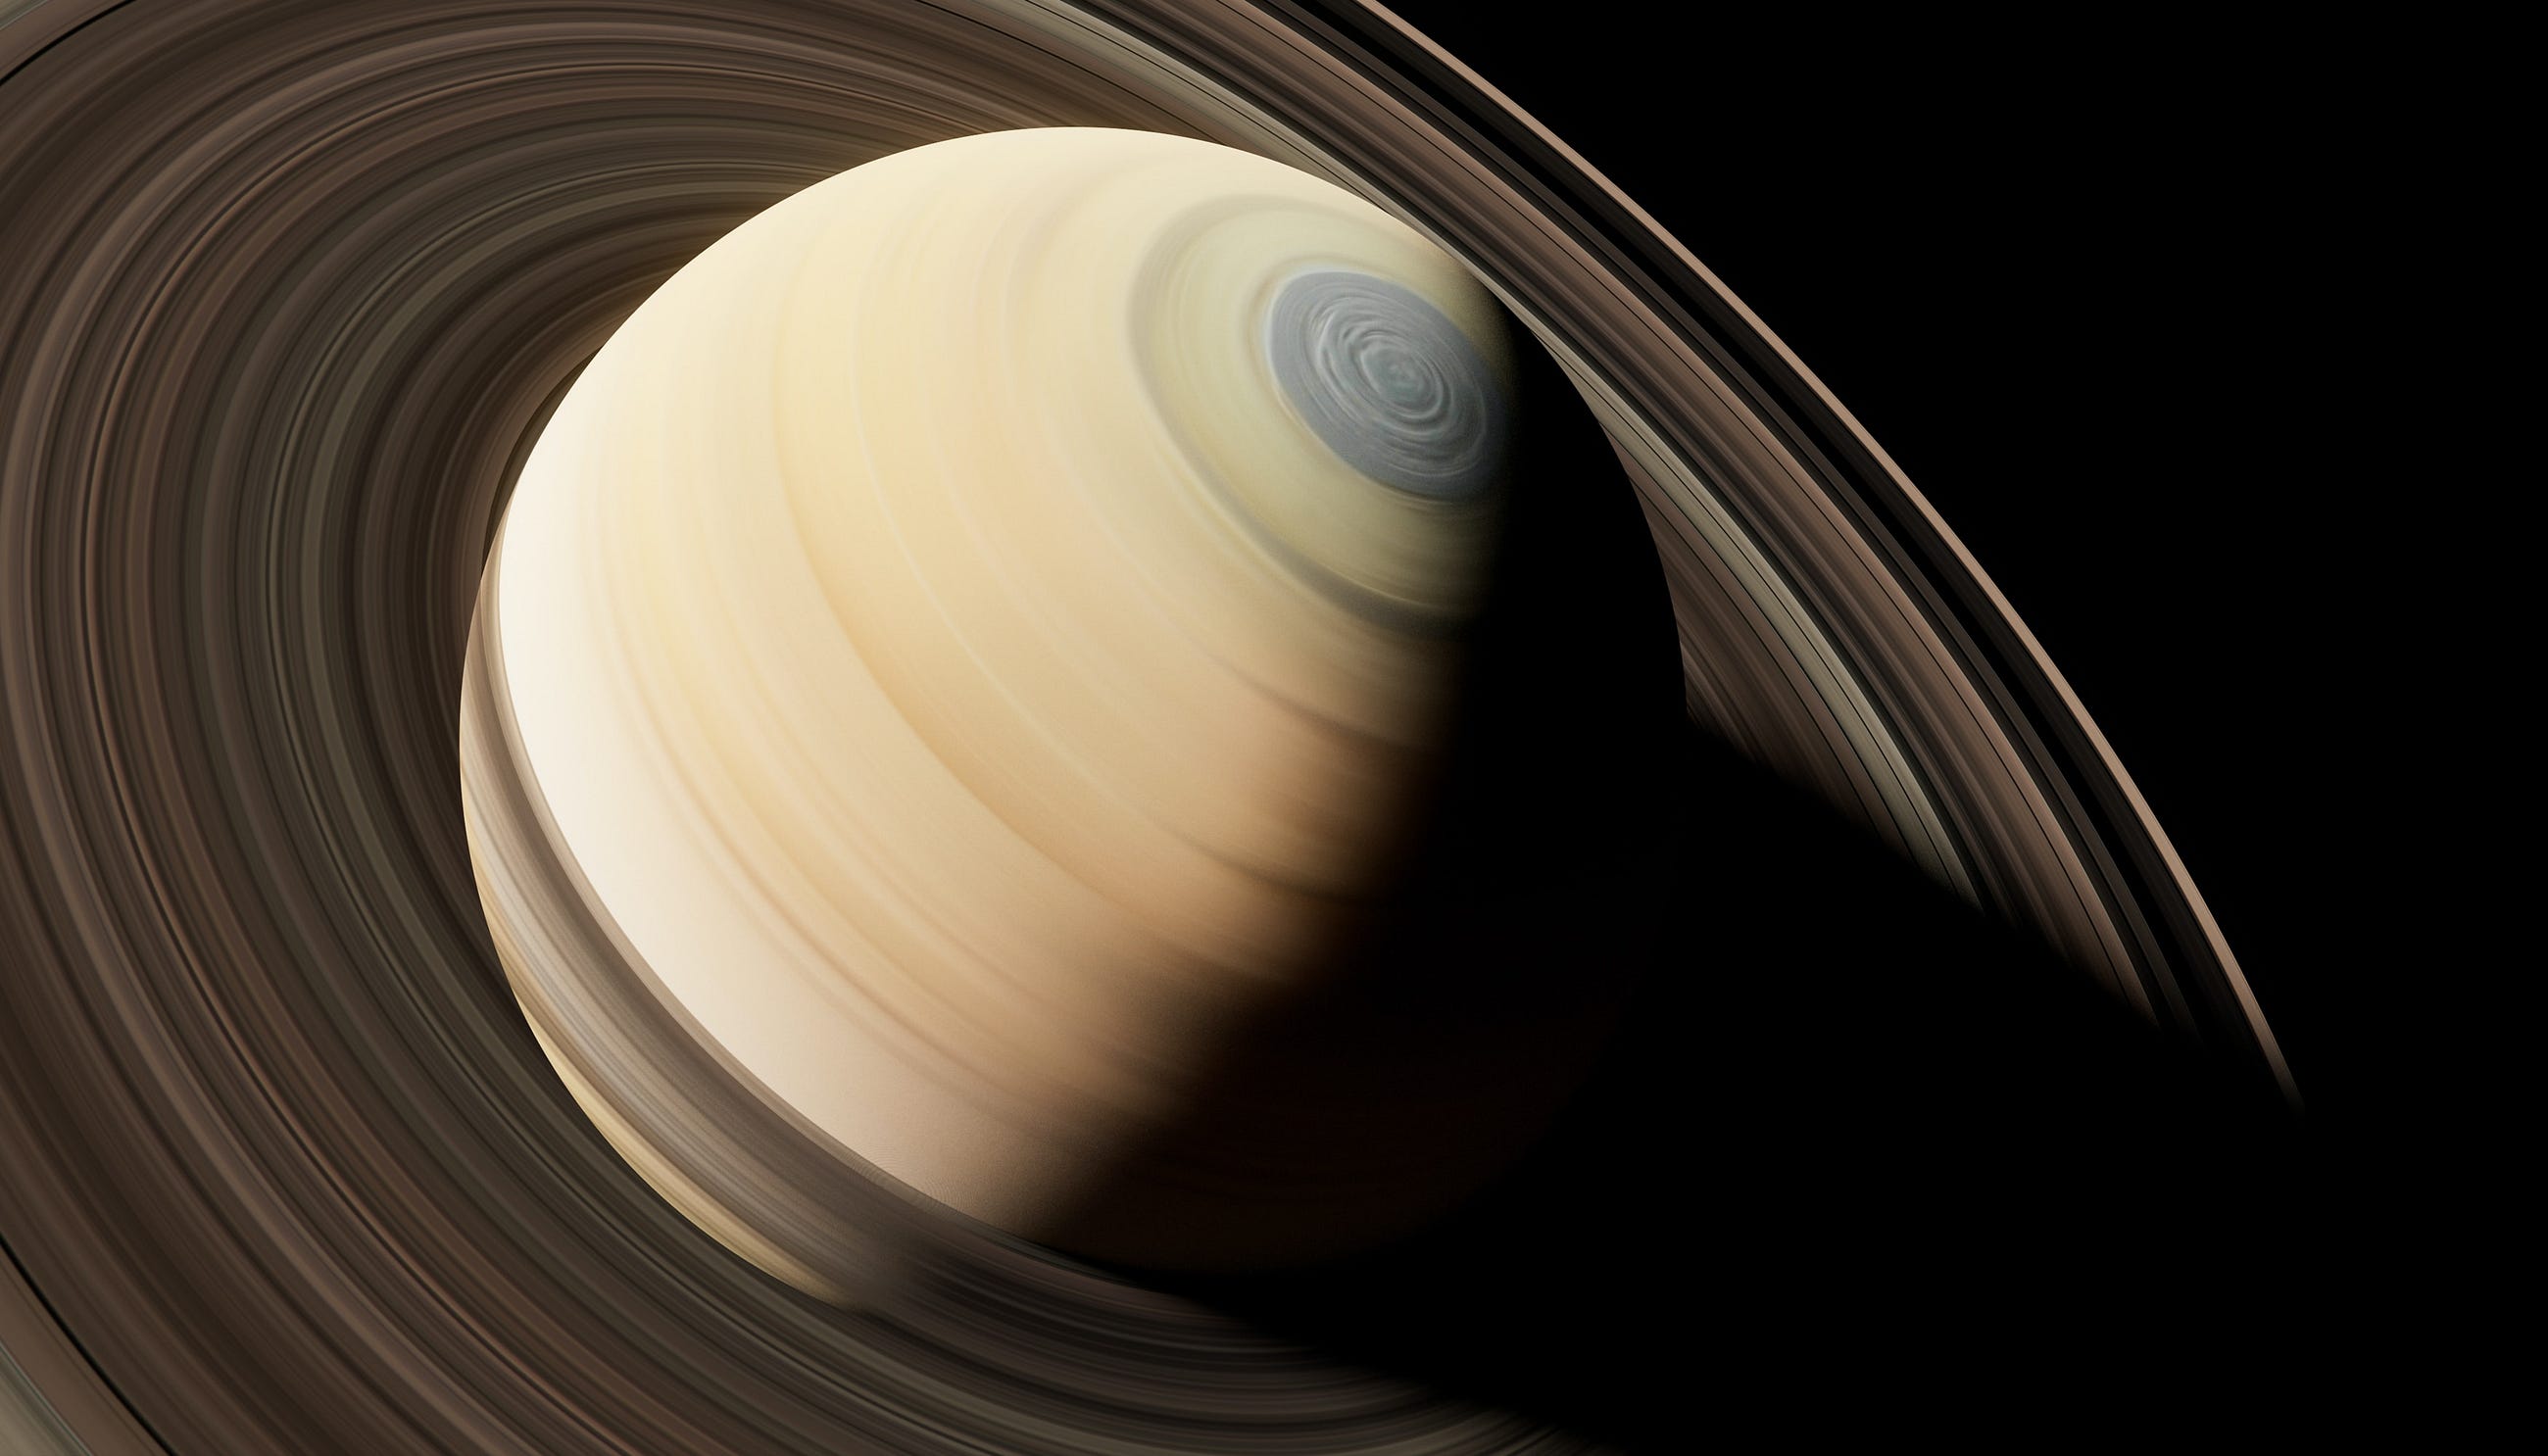 Why Does Saturn Have Flat Rings-